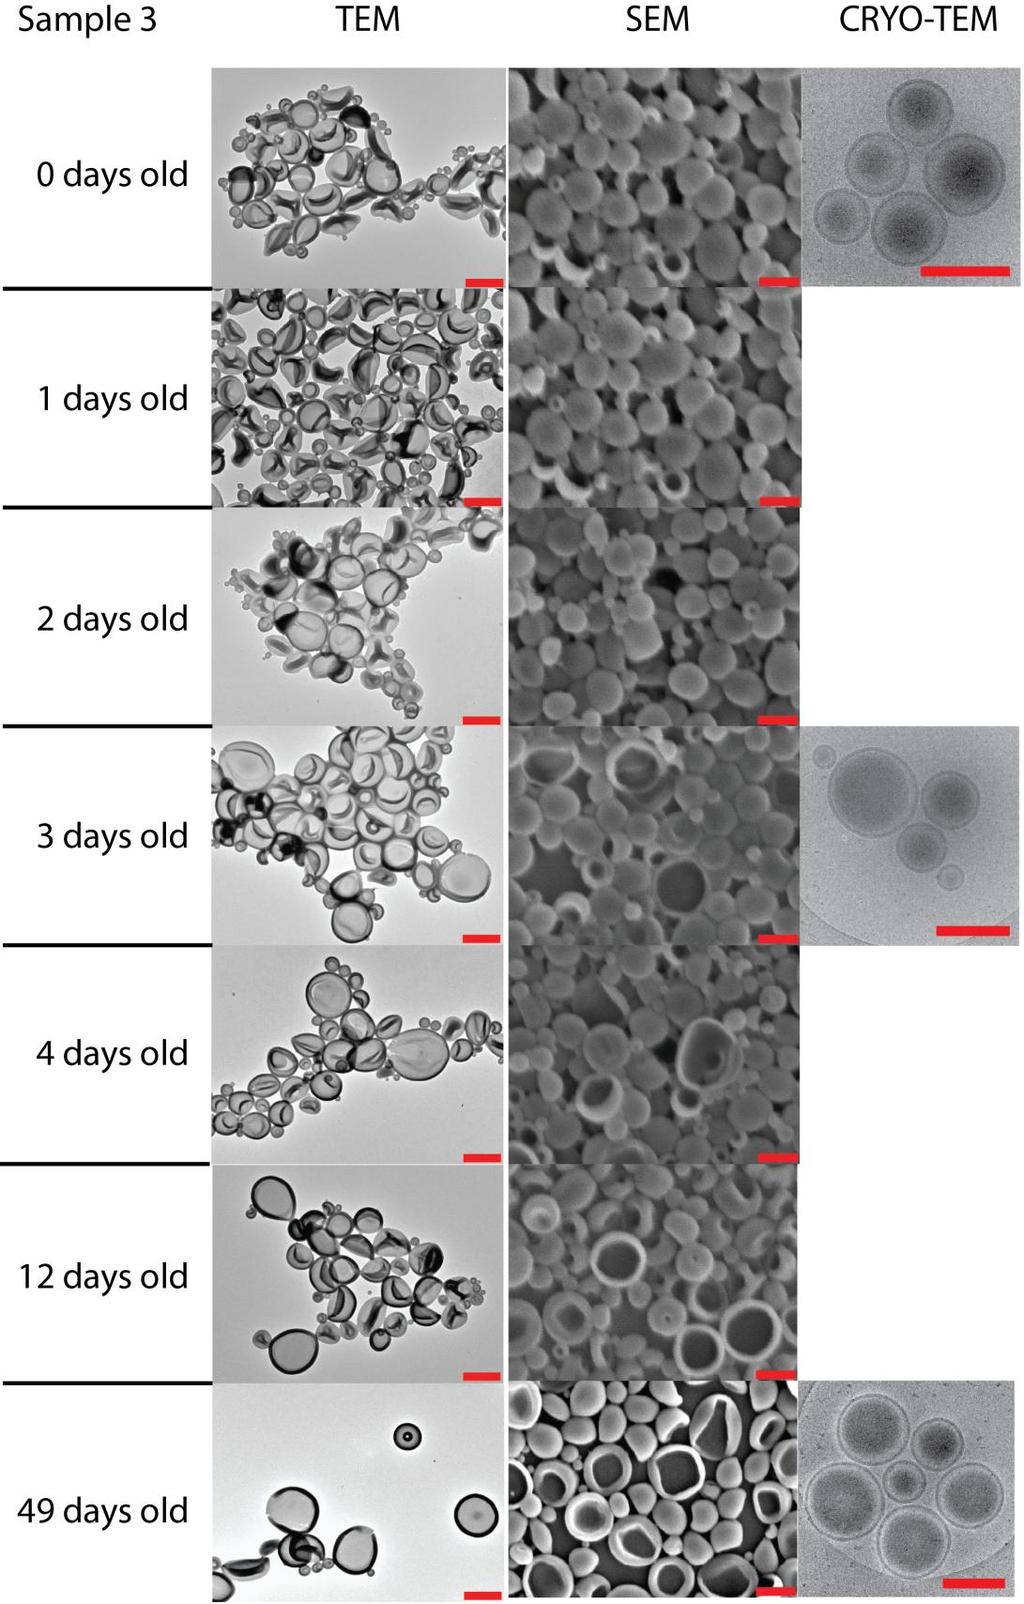 Supplementary Figure 3. TEM and SEM images of sample 3 at seven different days after selfassembly. Cryo-TEM is shown on the right.